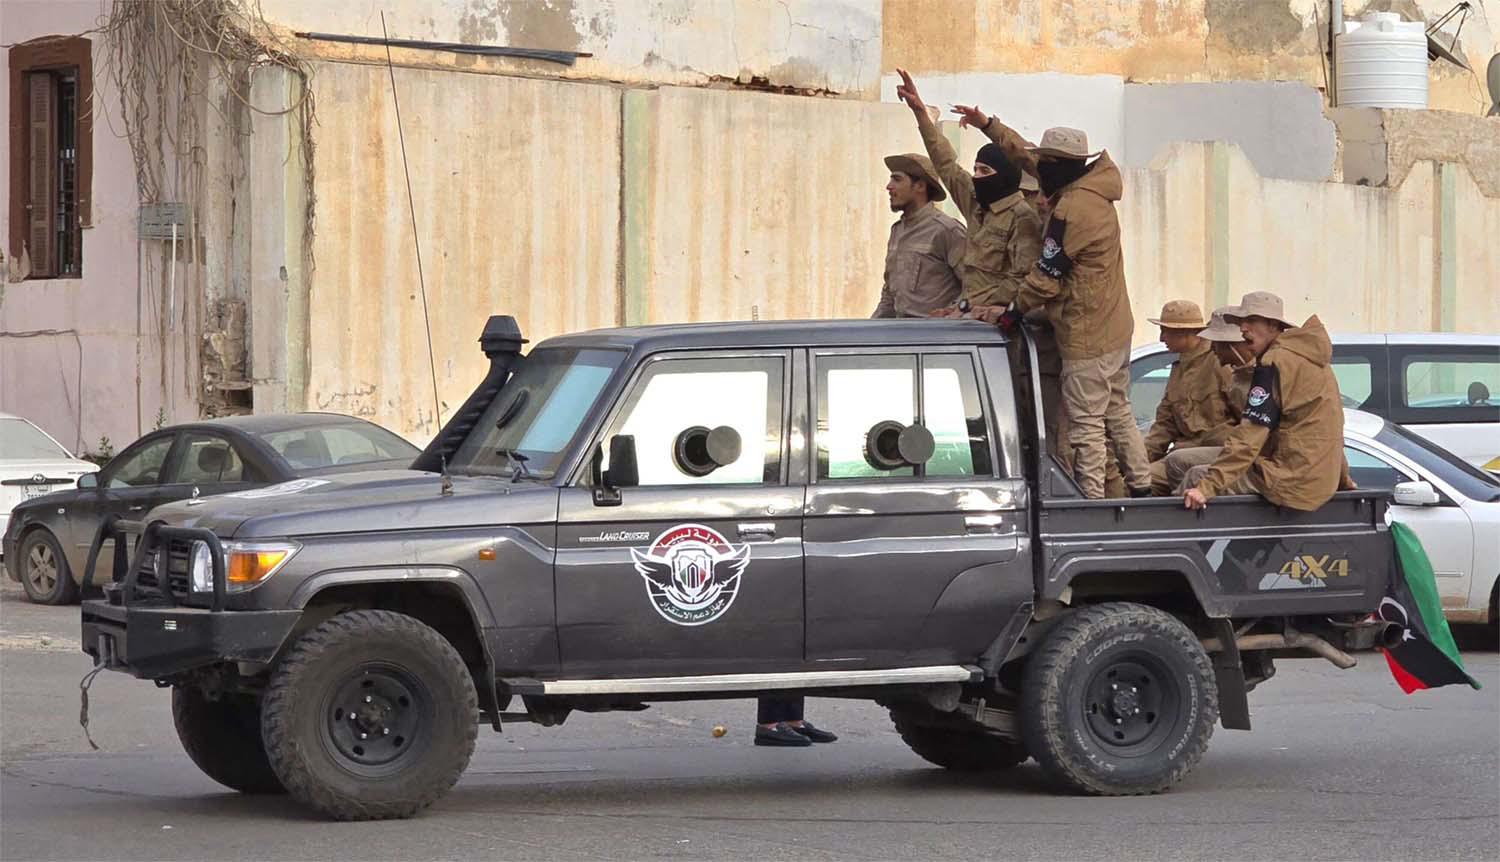 Most of the main factions in Tripoli retain bases inside the city